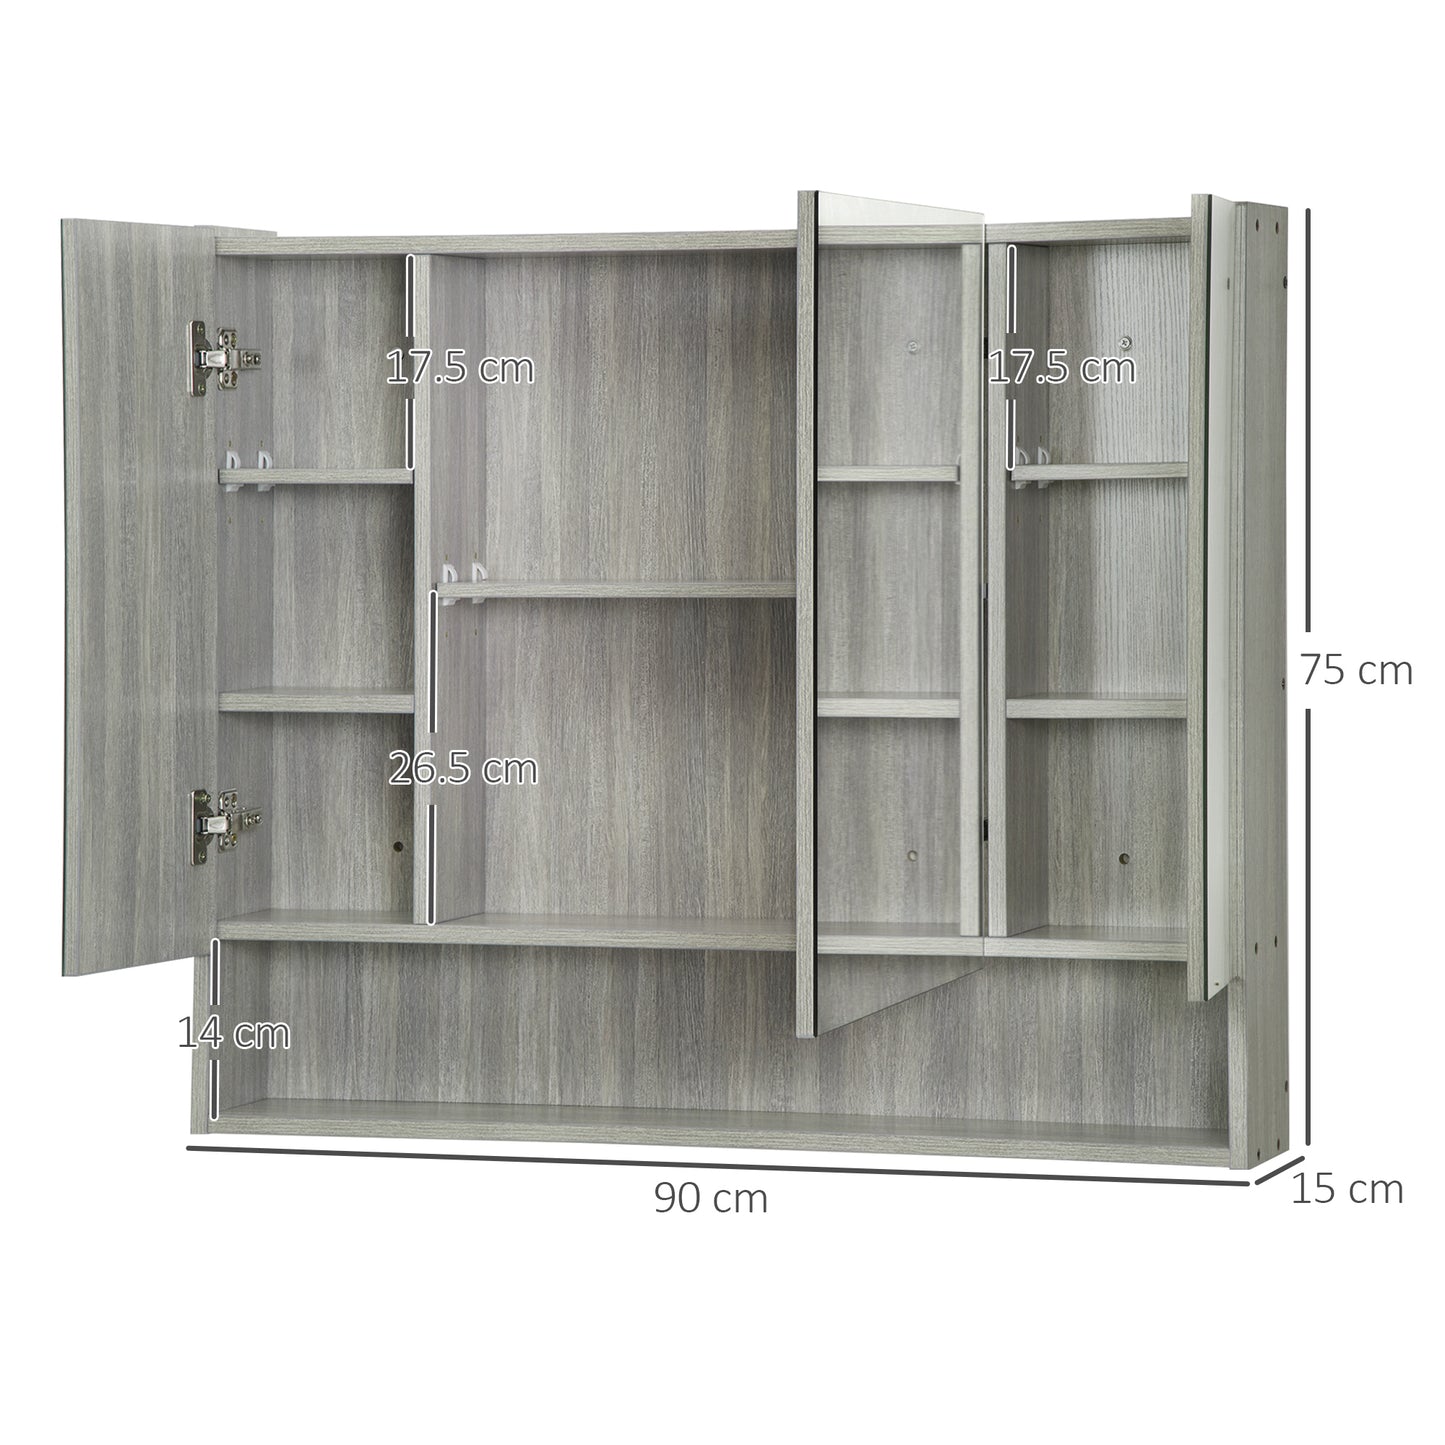 kleankin Bathroom Mirror Cabinet, Wall Mounted Storage Cabinet with Adjustable Shelves, 3 Doors and Cupboards, Grey